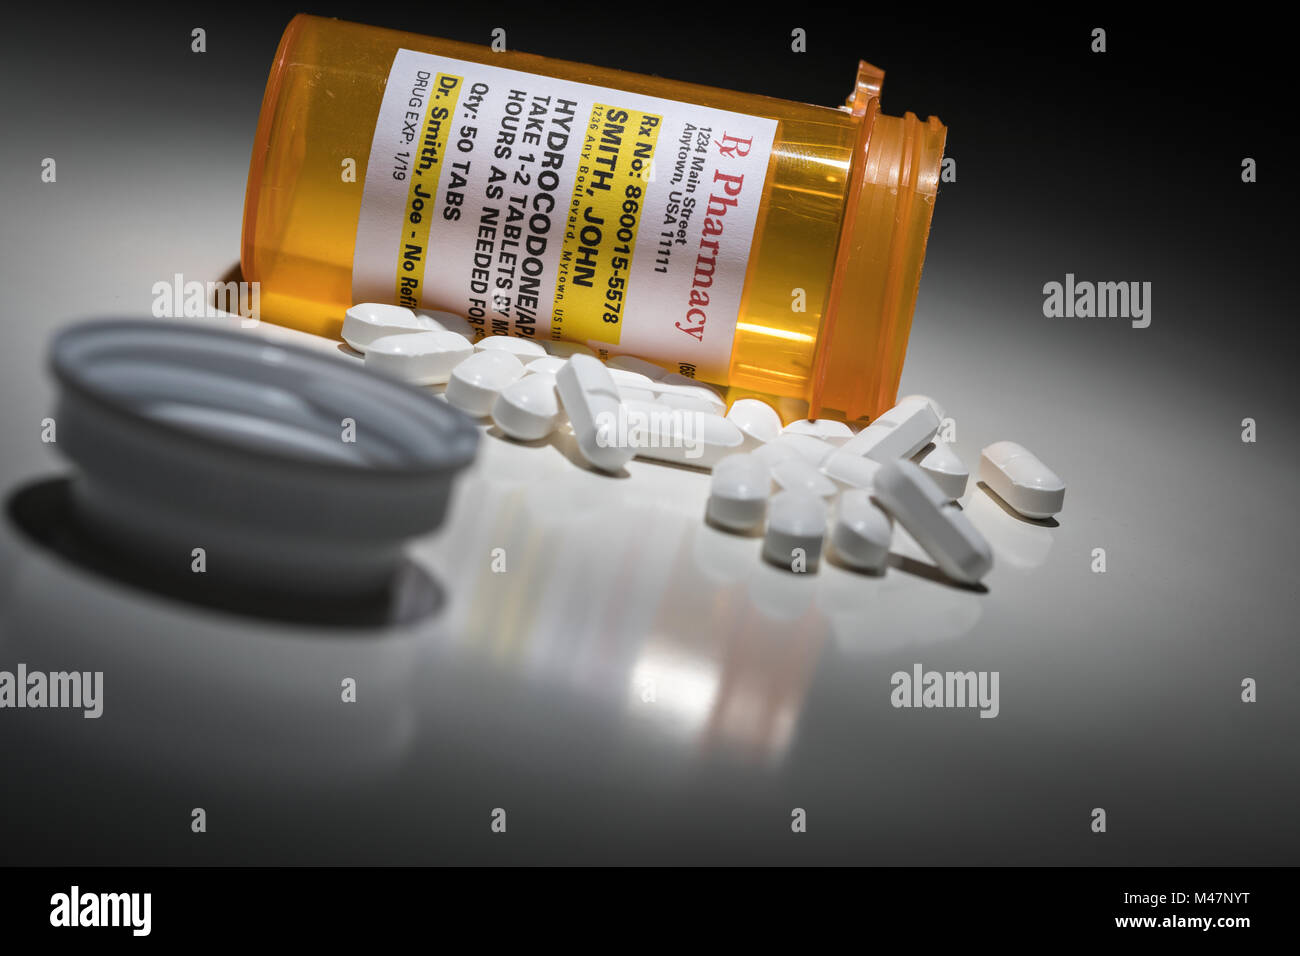 Hydrocodone Pills and Prescription Bottle with Non Proprietary Label. No model release required - contains ficticious information. Stock Photo